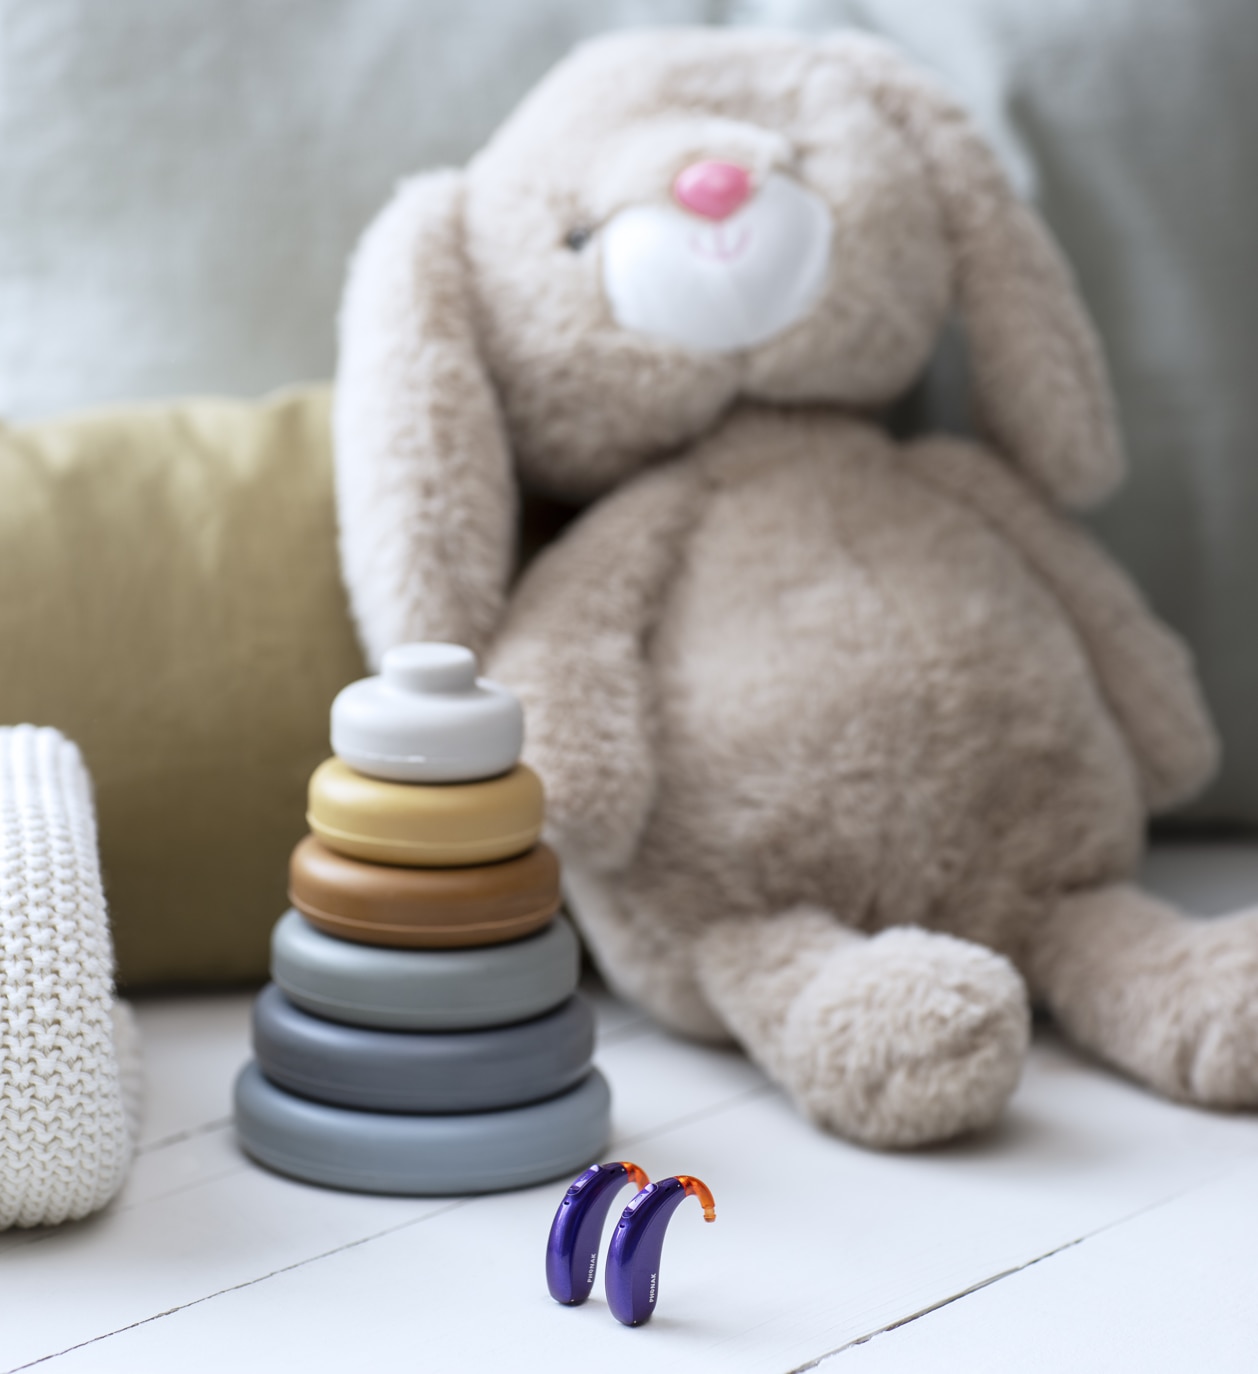 Hearing aids near stuffed animal and baby toy